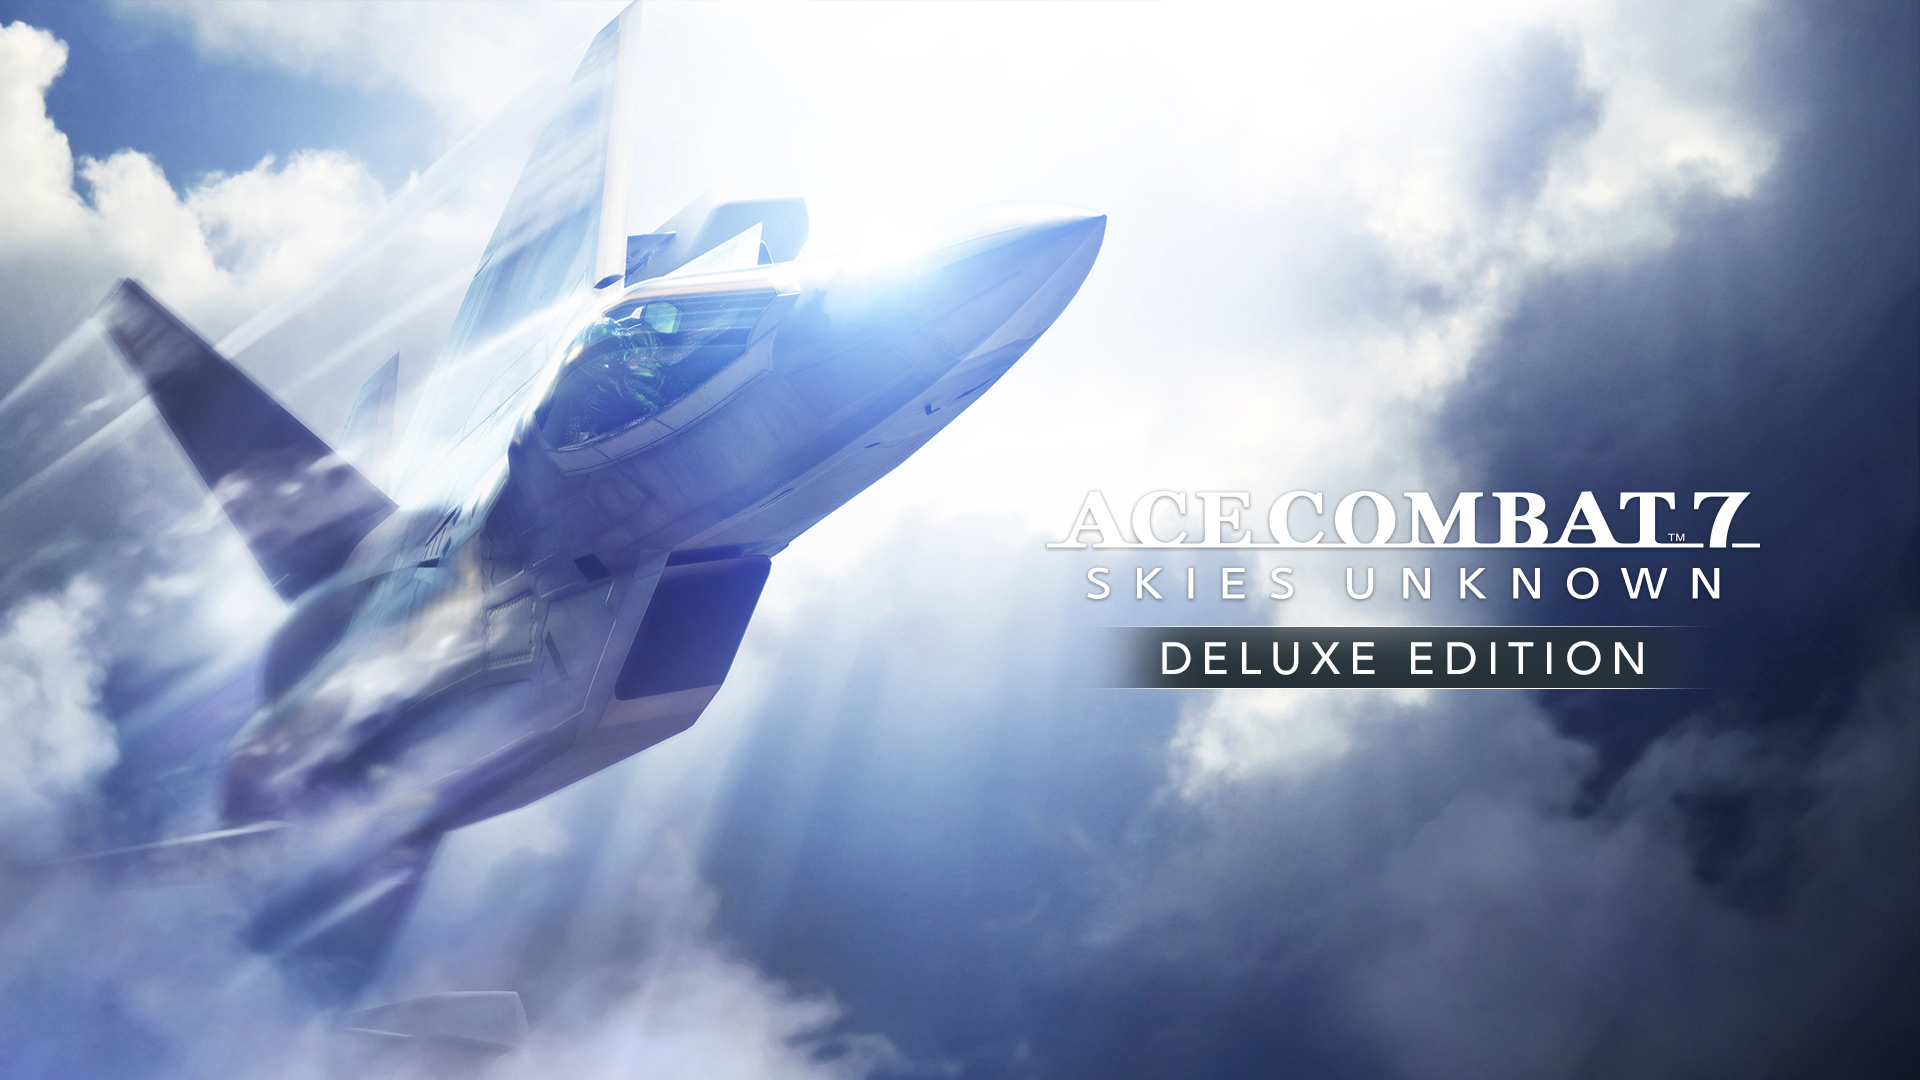 Image Ac7 Deluxe Edition Acepedia Fandom Powered Free Download Nude